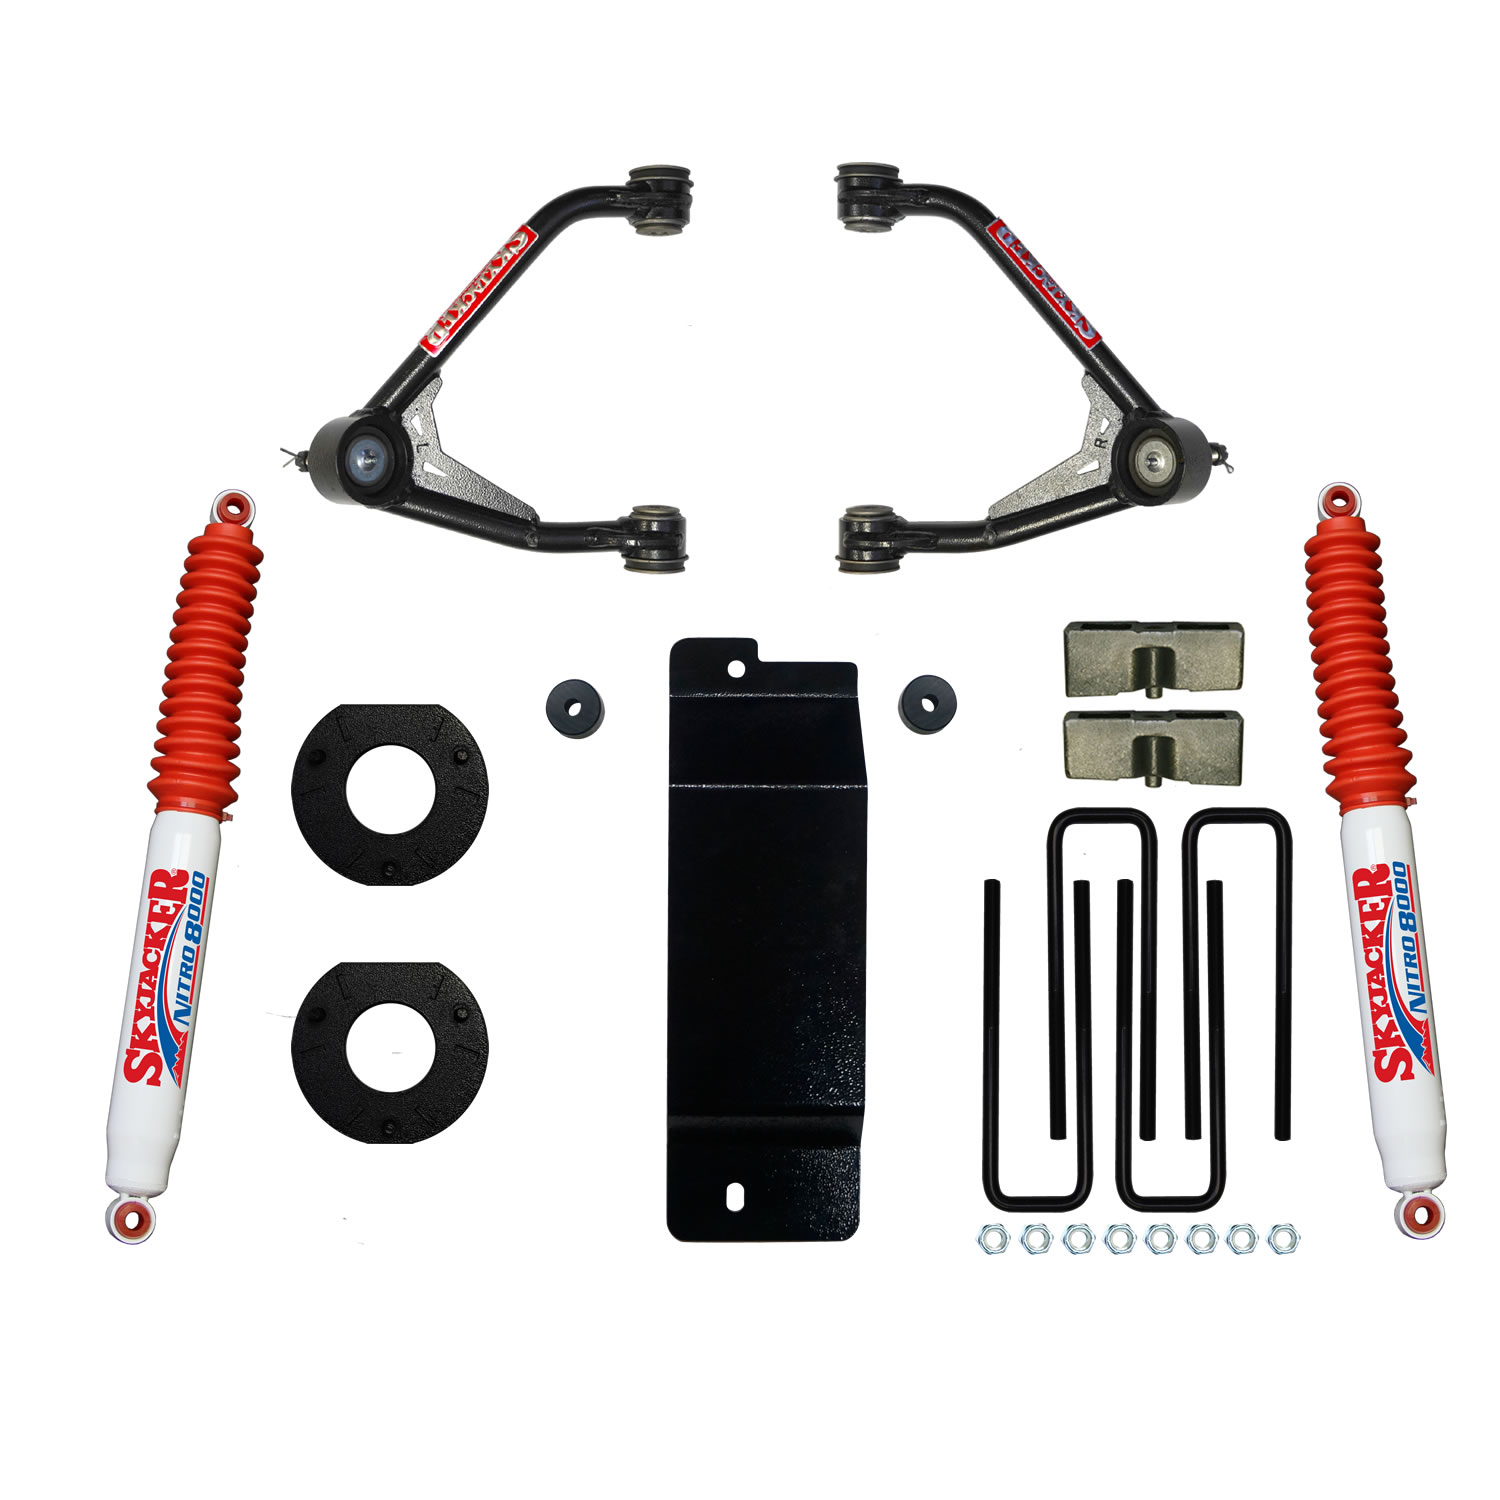 3.500-4.000 In. Upper Control Arm Lift Kit with BlackMax Rear Shocks for 2014-2016 GM 1500 4WD